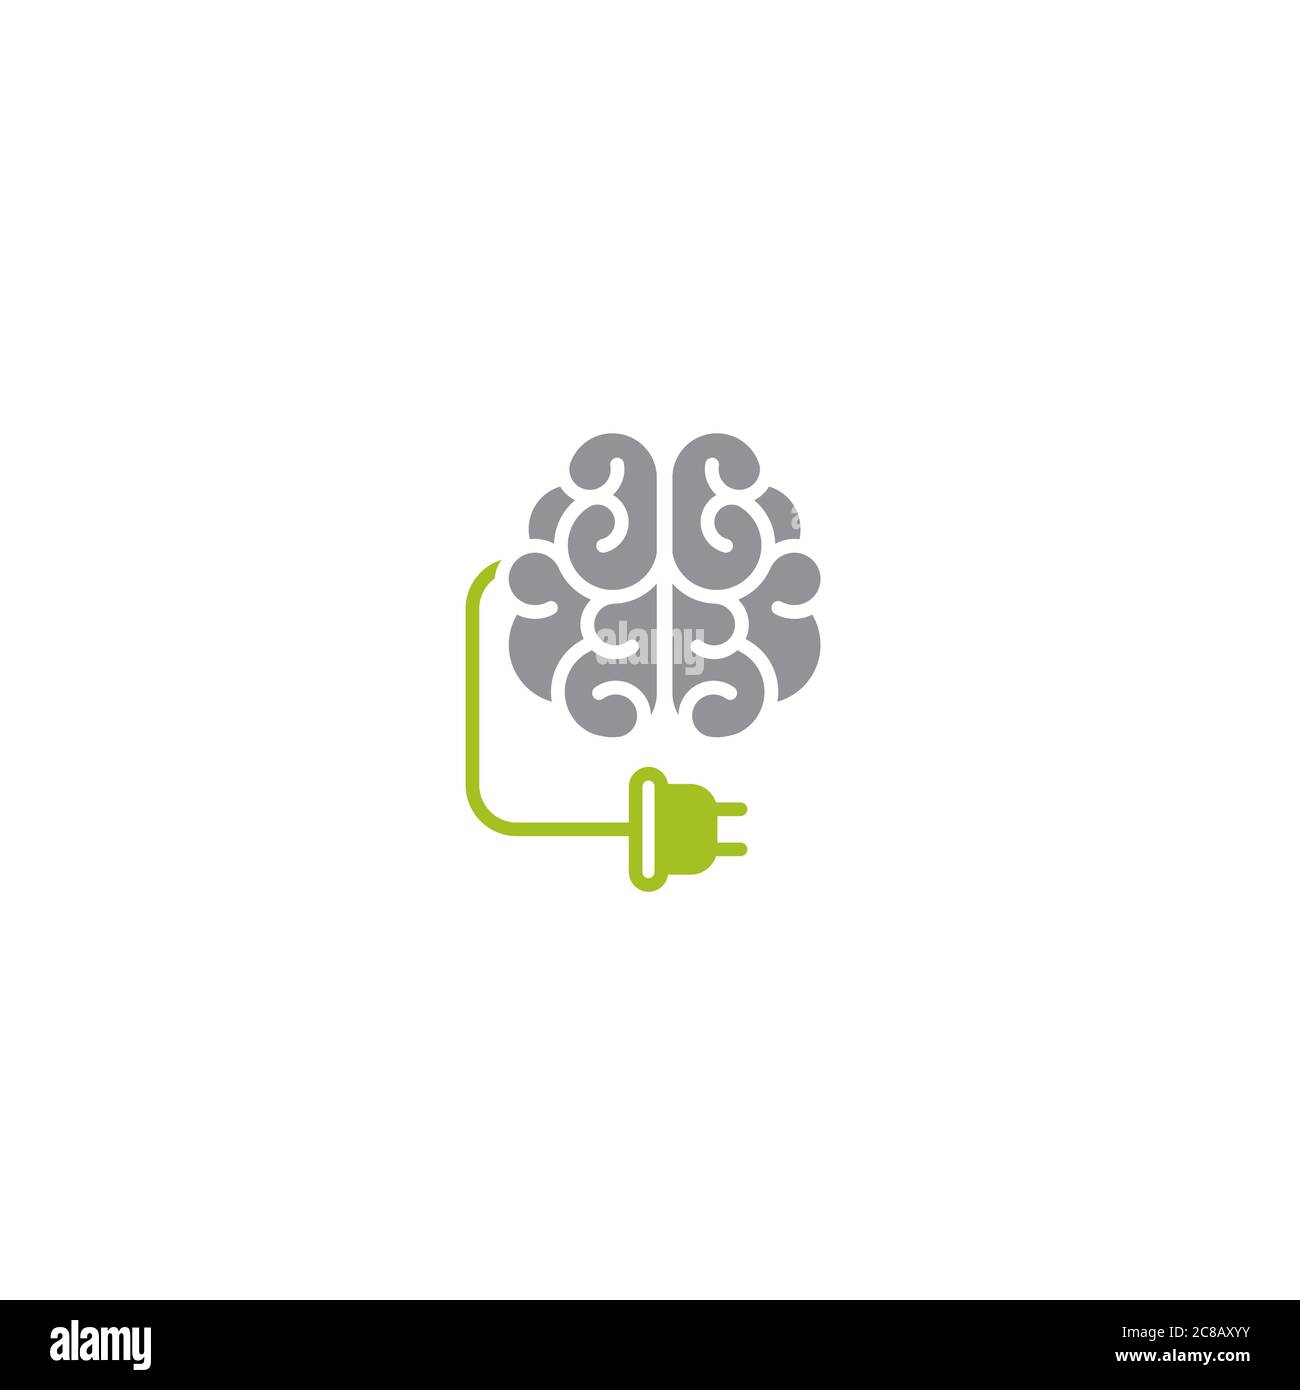 brain and electrical plug. Inspiration charge flat icon. New business idea. smart, clever, creative symbol Vector illustration. Knowledge, solution, i Stock Vector